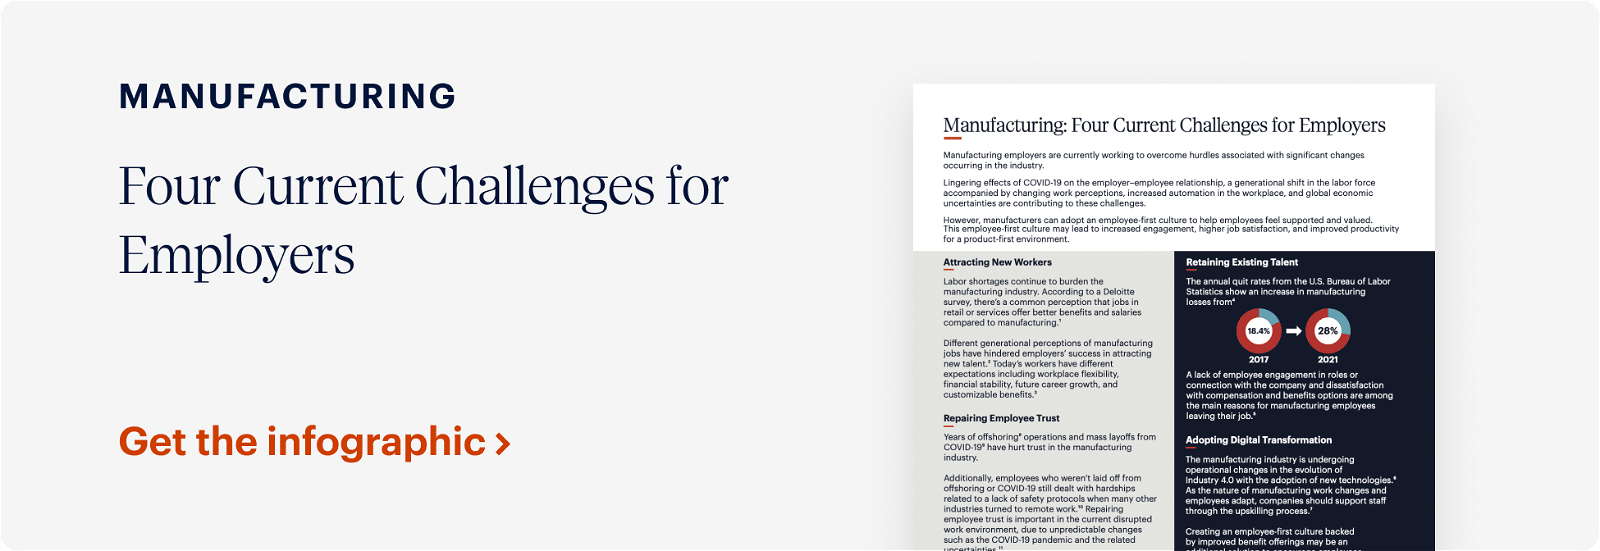 An infographic titled "Manufacturing: Four Current Challenges for Employers" is displayed. The text discusses attracting new workers, repairing existing talent, agility and transformation, and the effects of COVID-19. A call-to-action button at the bottom reads "Get the infographic.